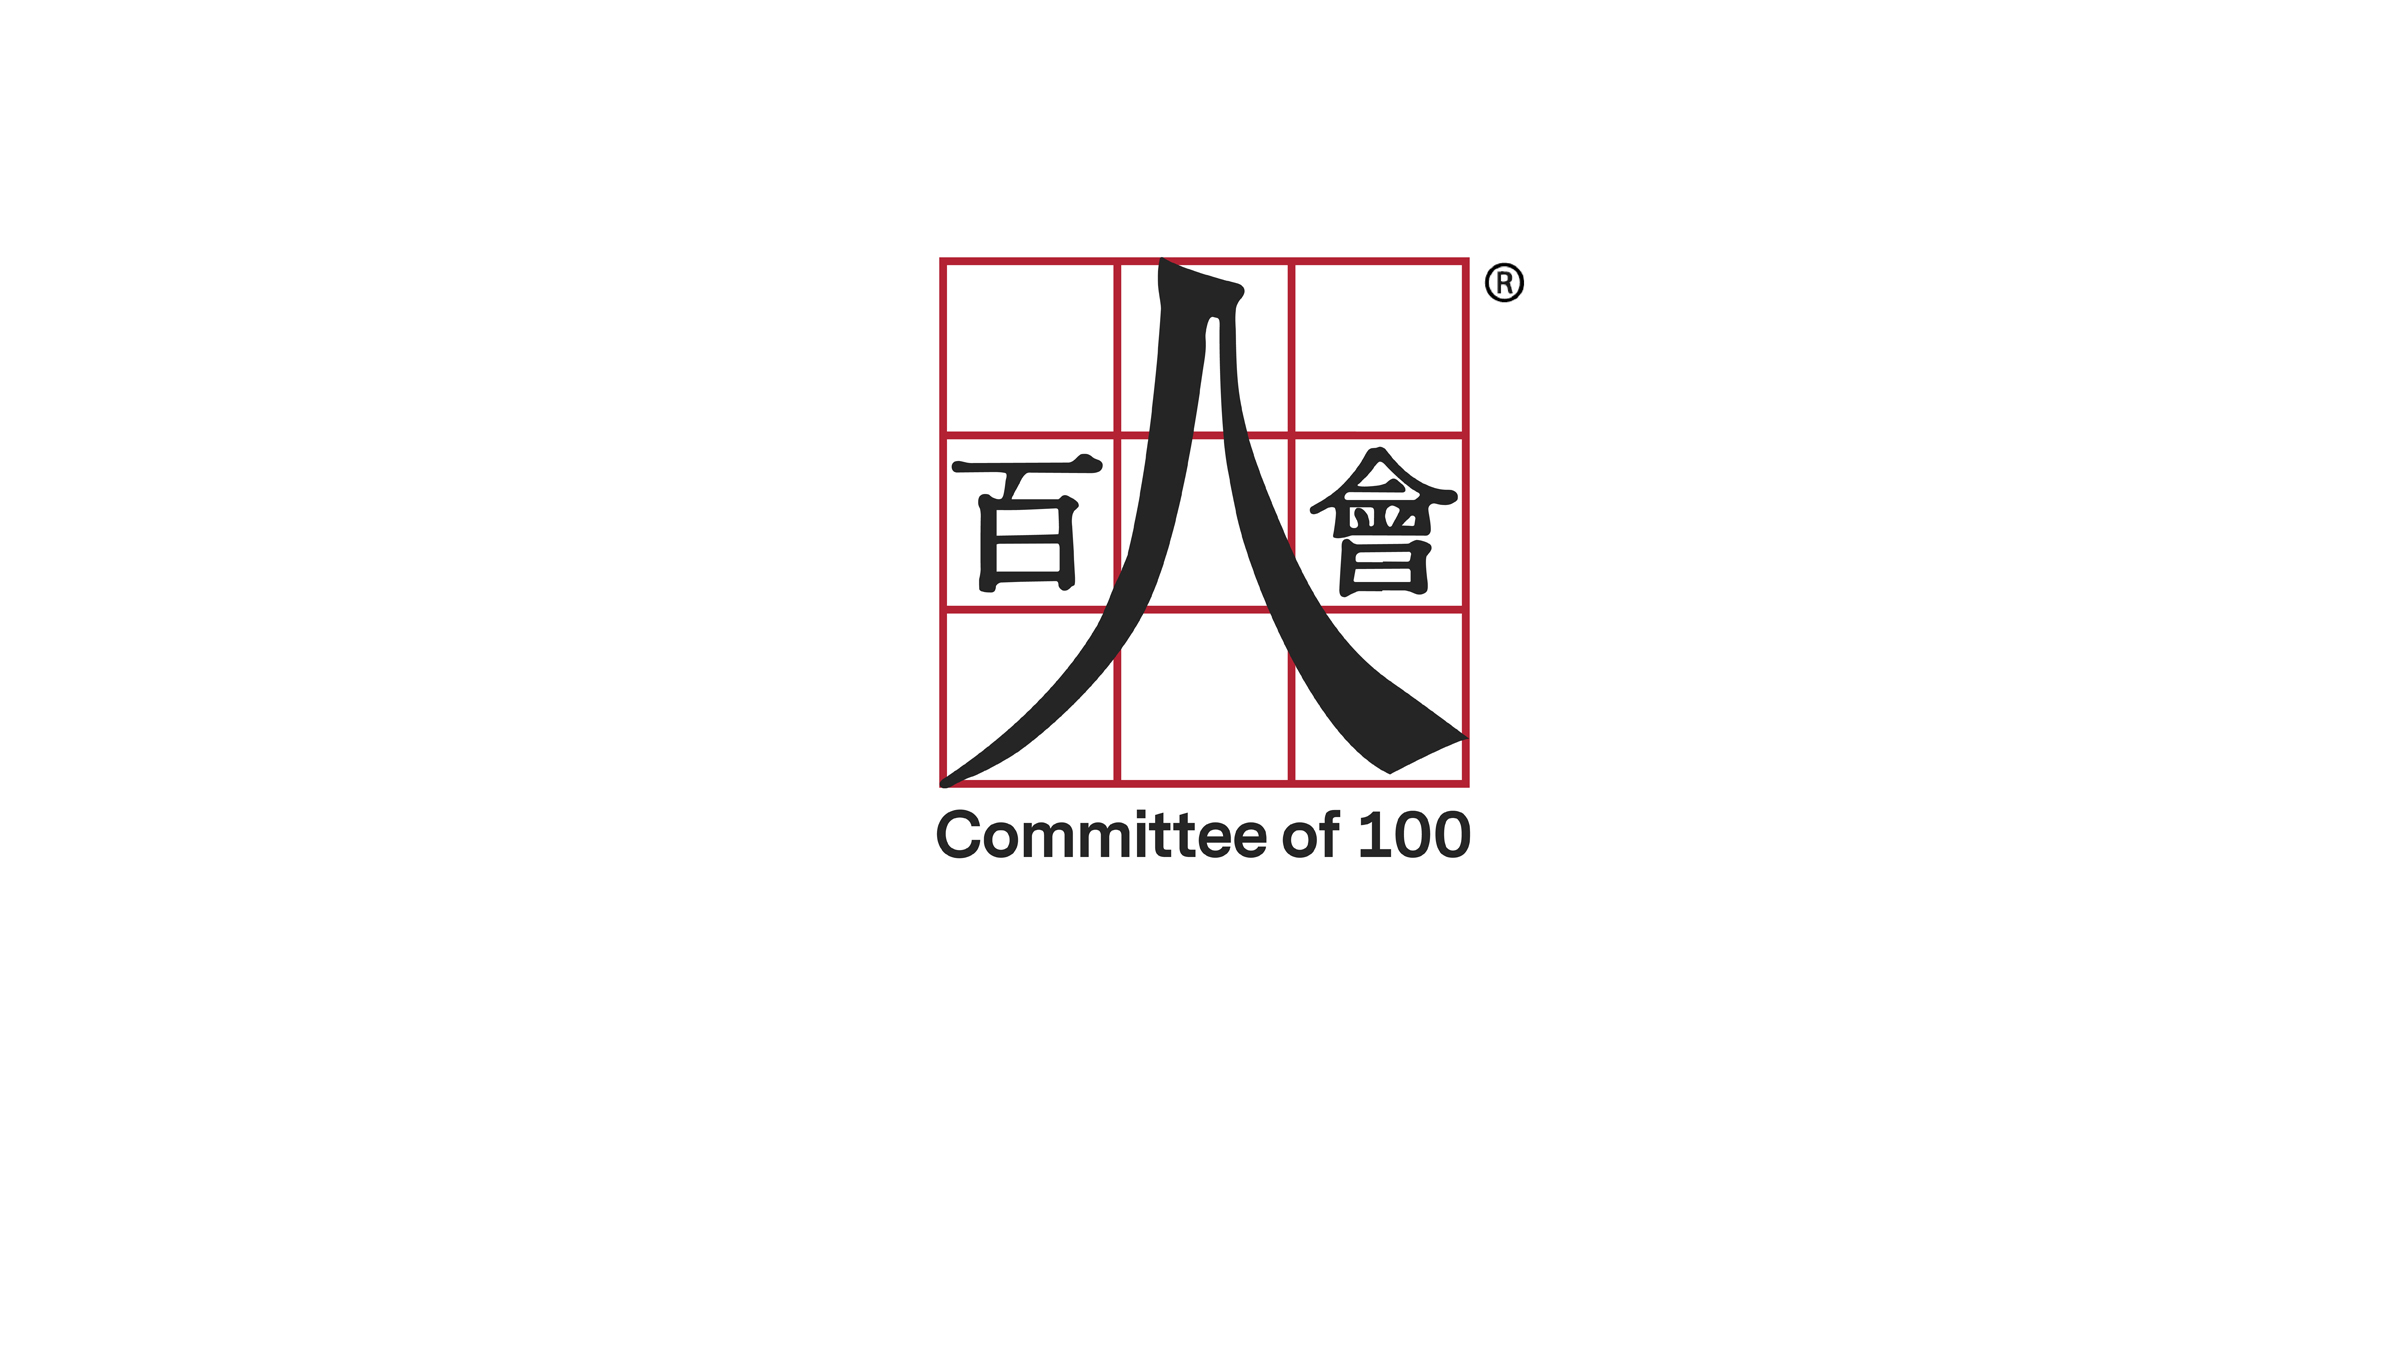 Committee of 100 Welcomes New President Z. Huang | 百人会欢迎新任总裁黄征宇的加入